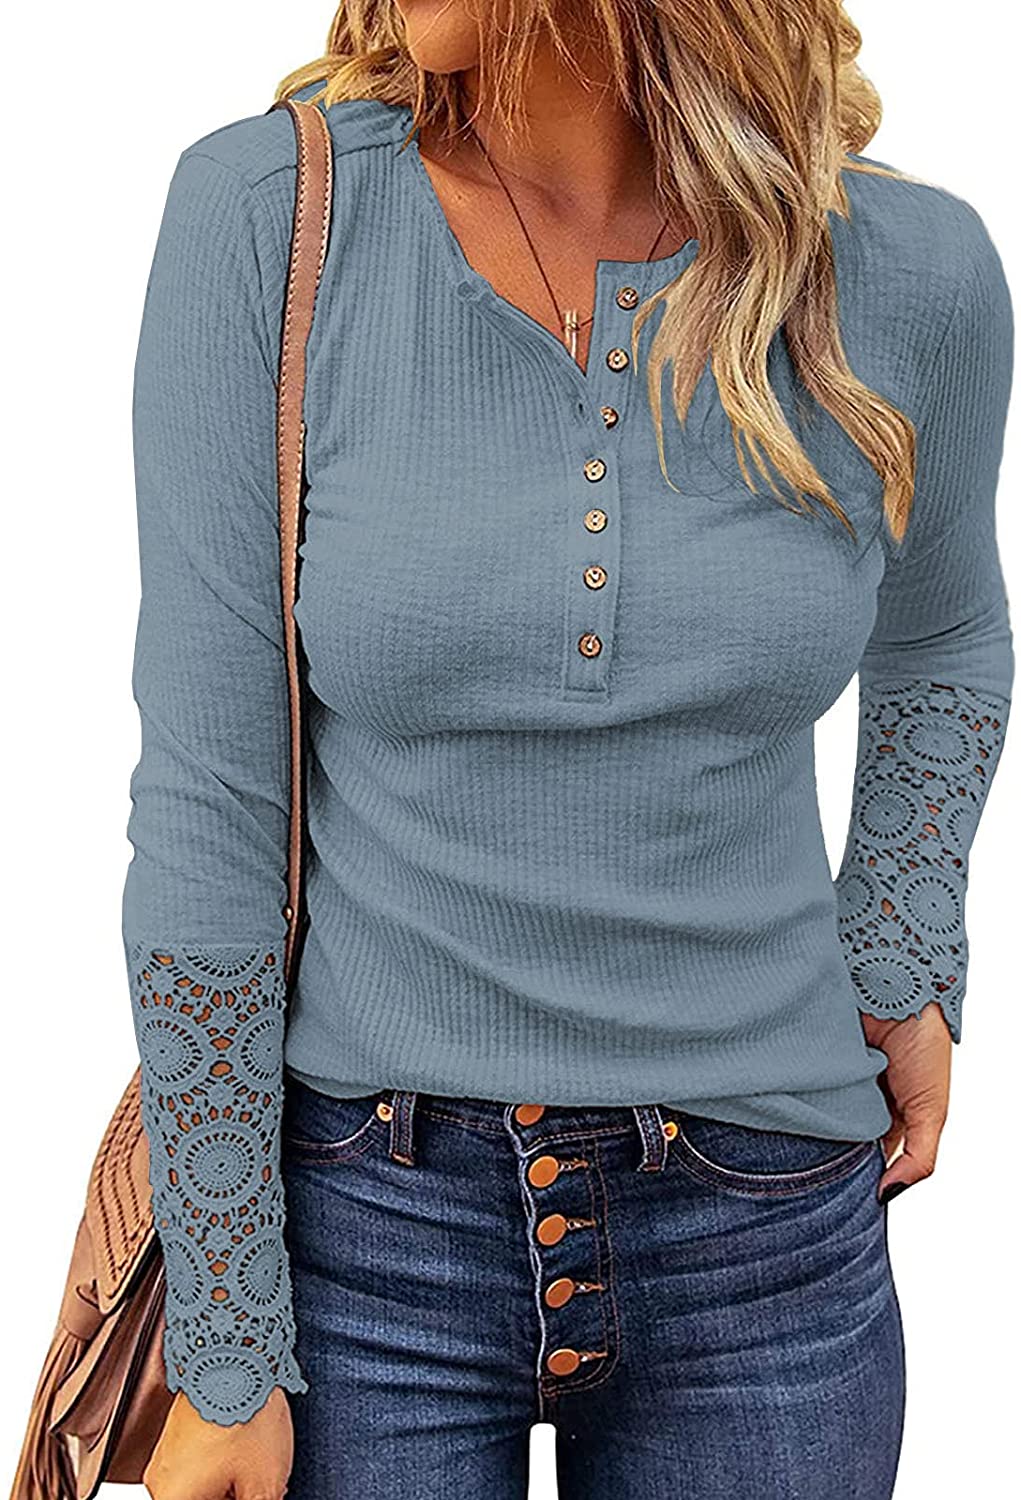 Kancystore Women's Long Sleeve Tops Lace V Neck Button Down Henley